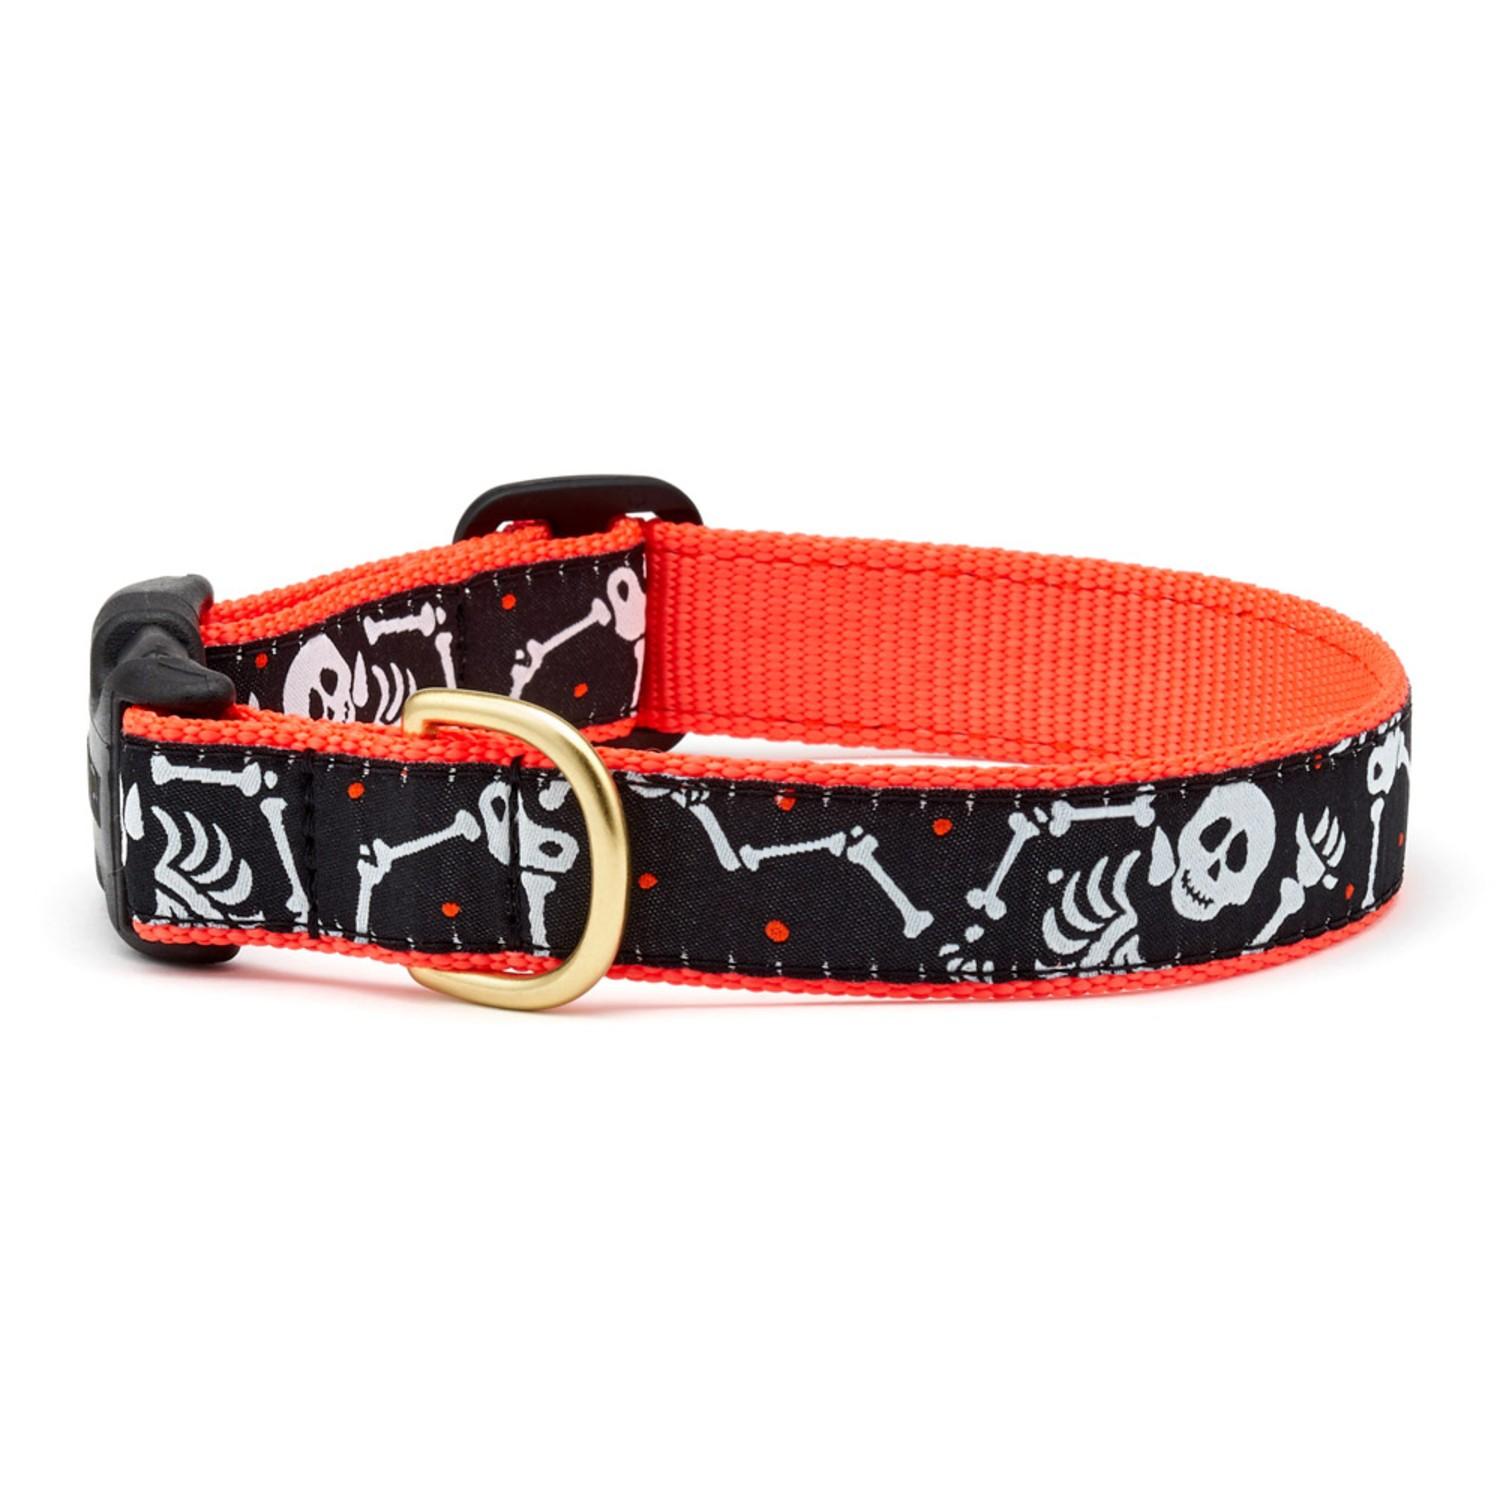 Bone Jangles Halloween Dog Collar by Up Country